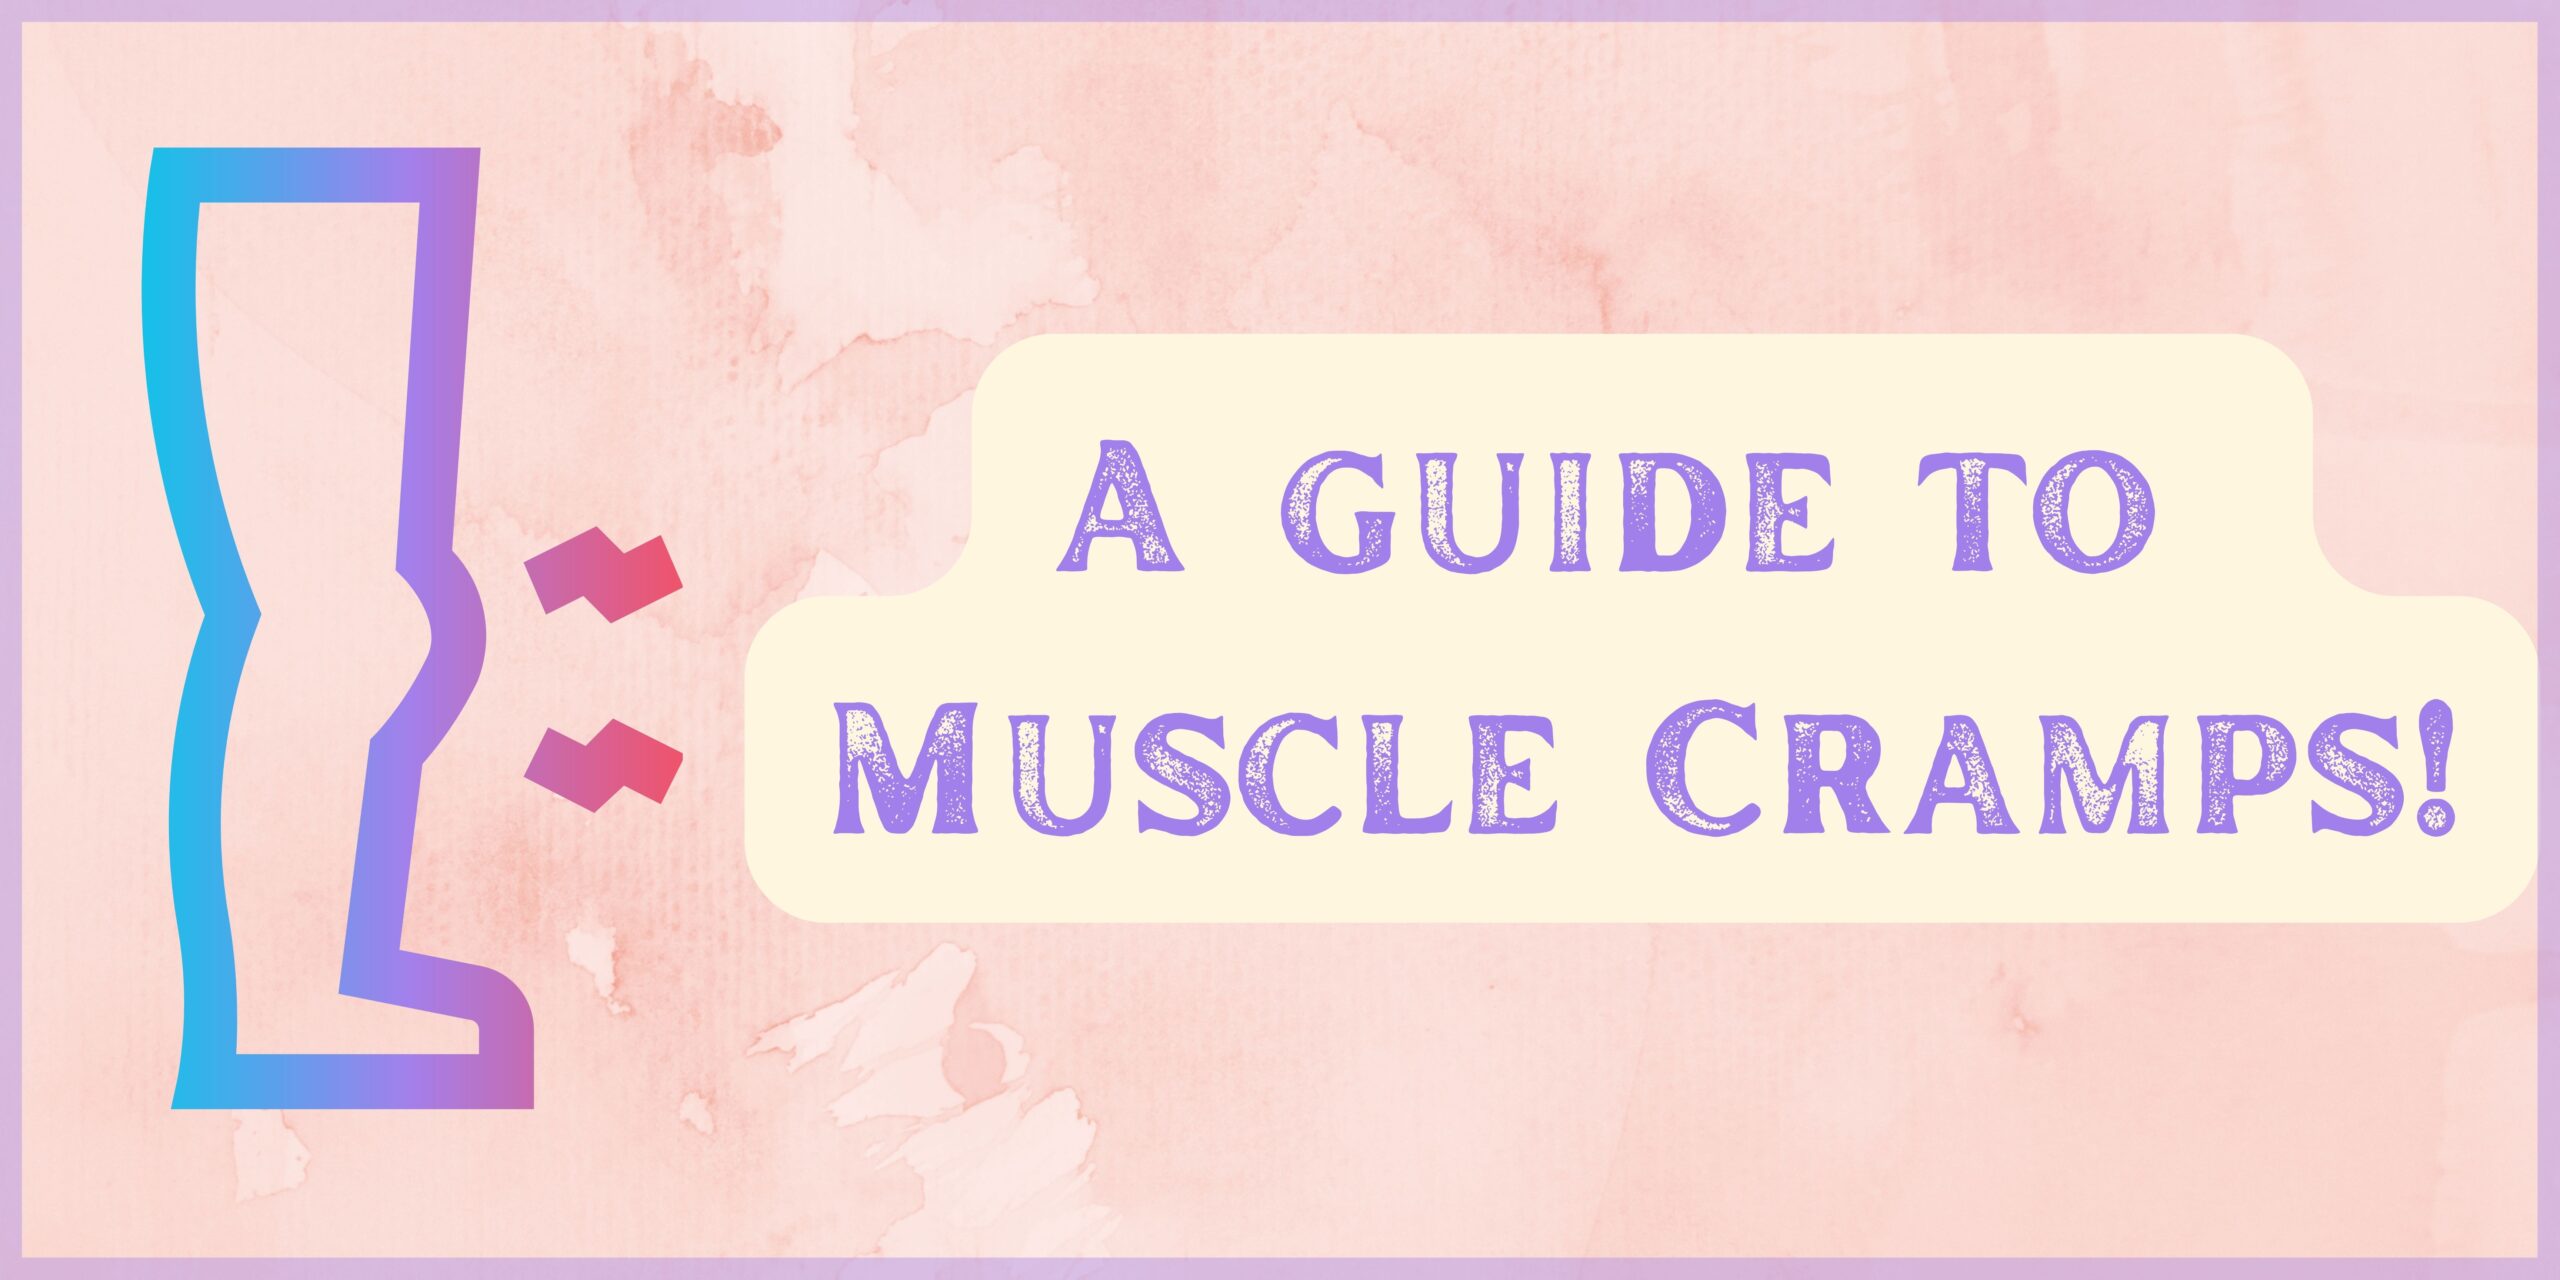 A guide to Muscle Cramps!